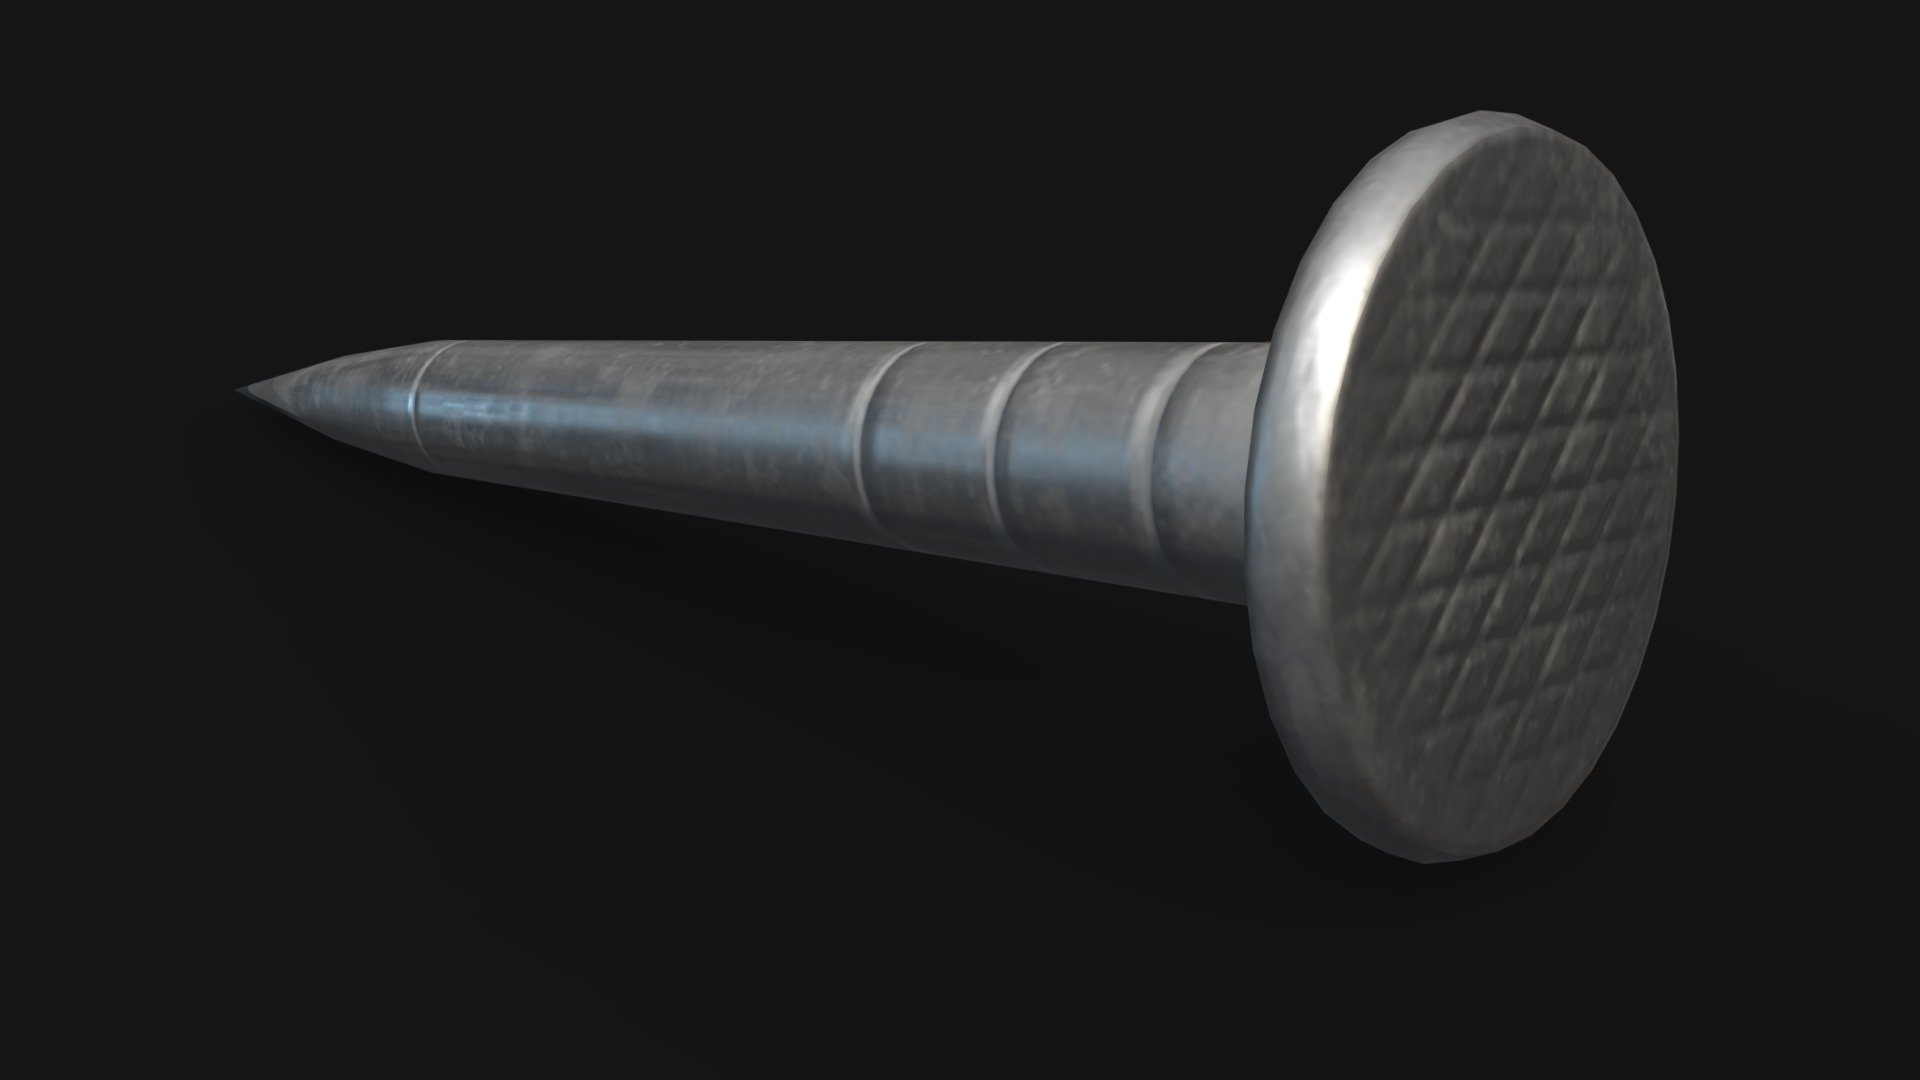 A nail to replace the nailgun's original Goldsrc model.

For Jabroni Brawl: Episode 3. https://store.steampowered.com/app/869480/Jabroni_Brawl_Episode_3/

Modelled in Blender, baked in Marmoset Toolbag, textured in Substance Painter 3d model